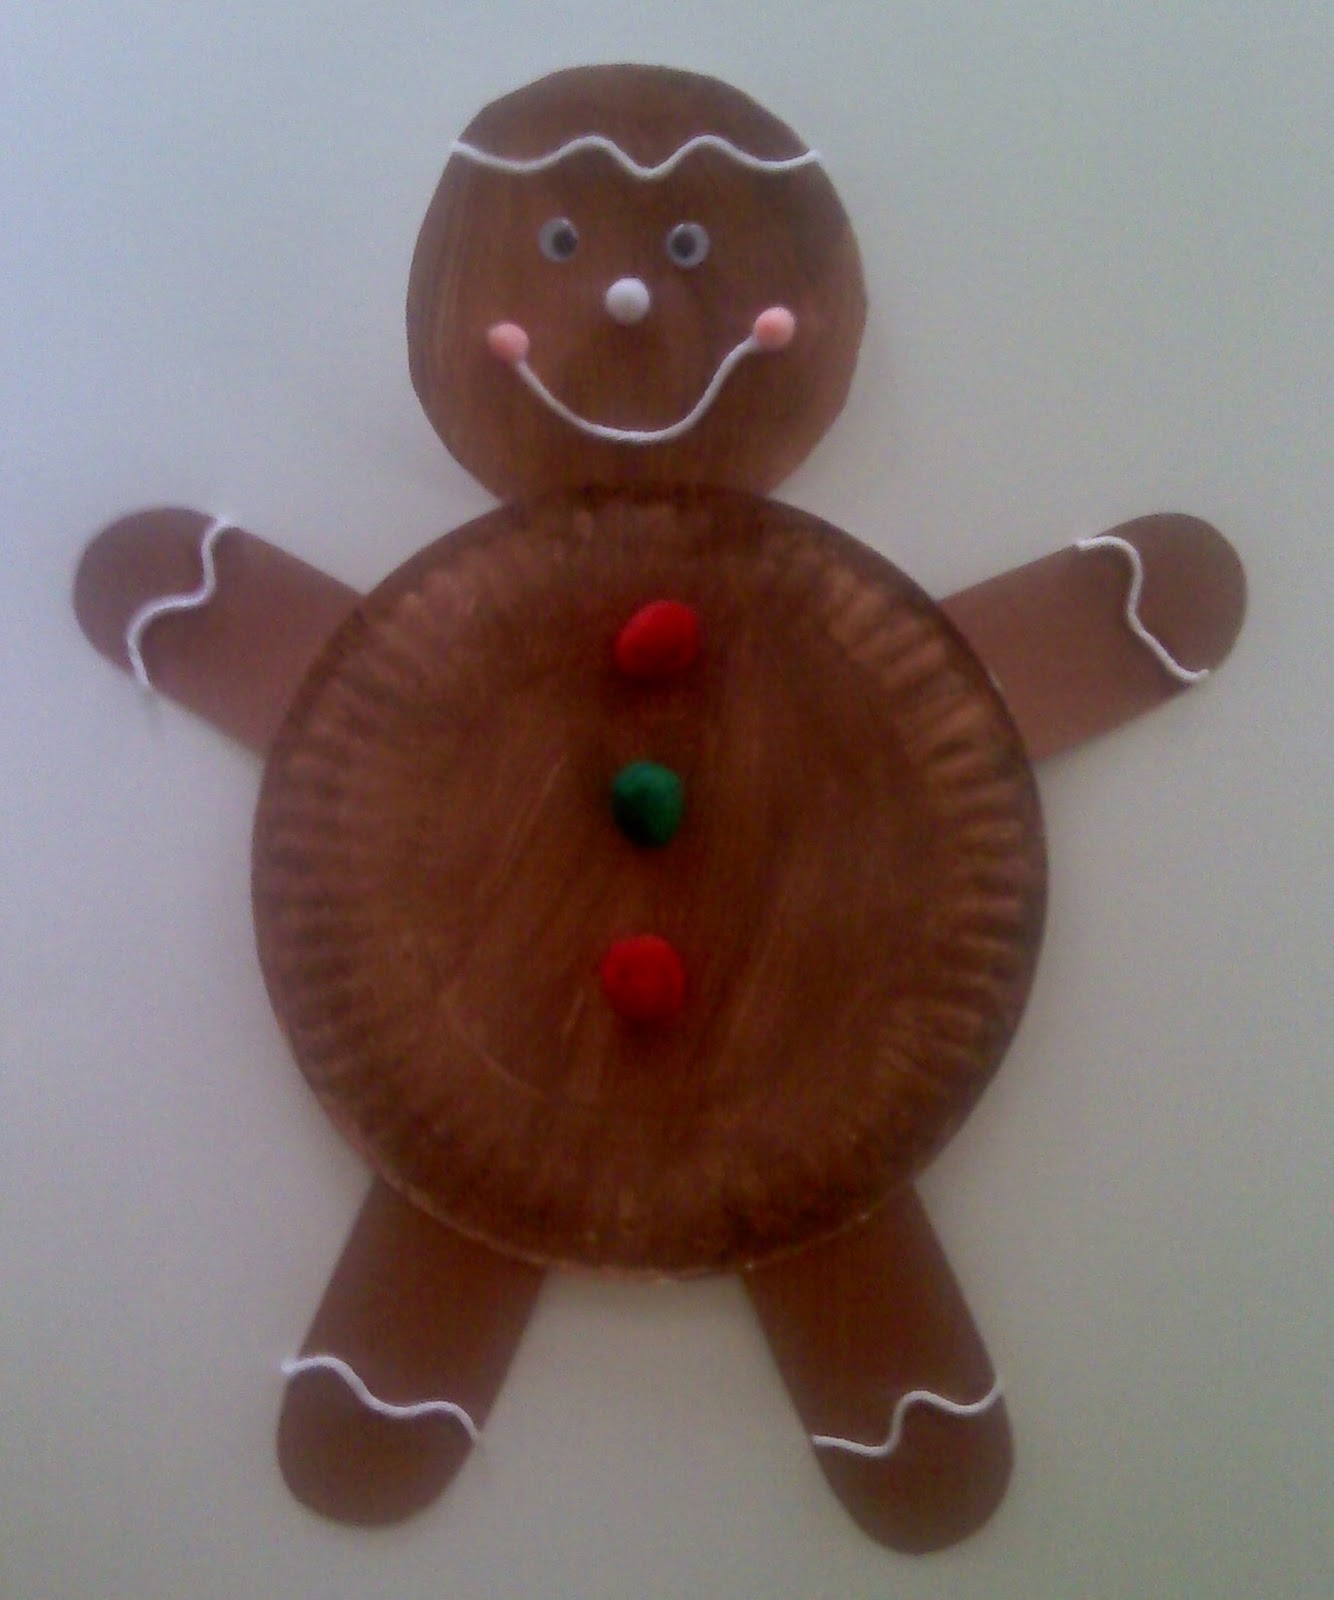 fun-and-free-gingerbread-man-activities-for-preschoolers-gingerbread-activities-preschool